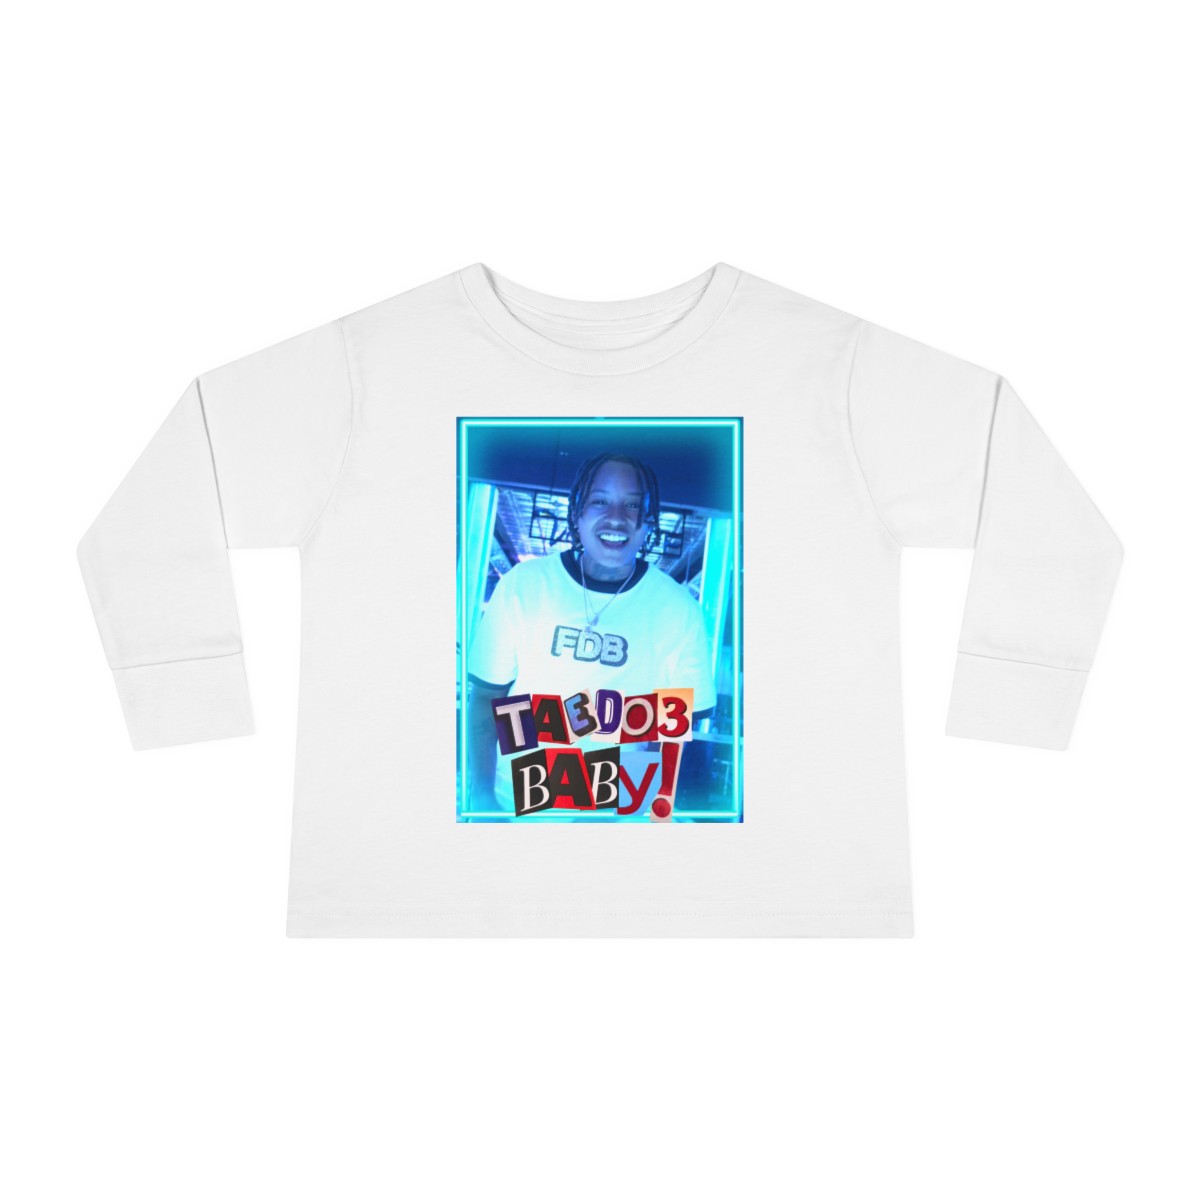 Toddler Love Don't Love Long Sleeve Tee product thumbnail image